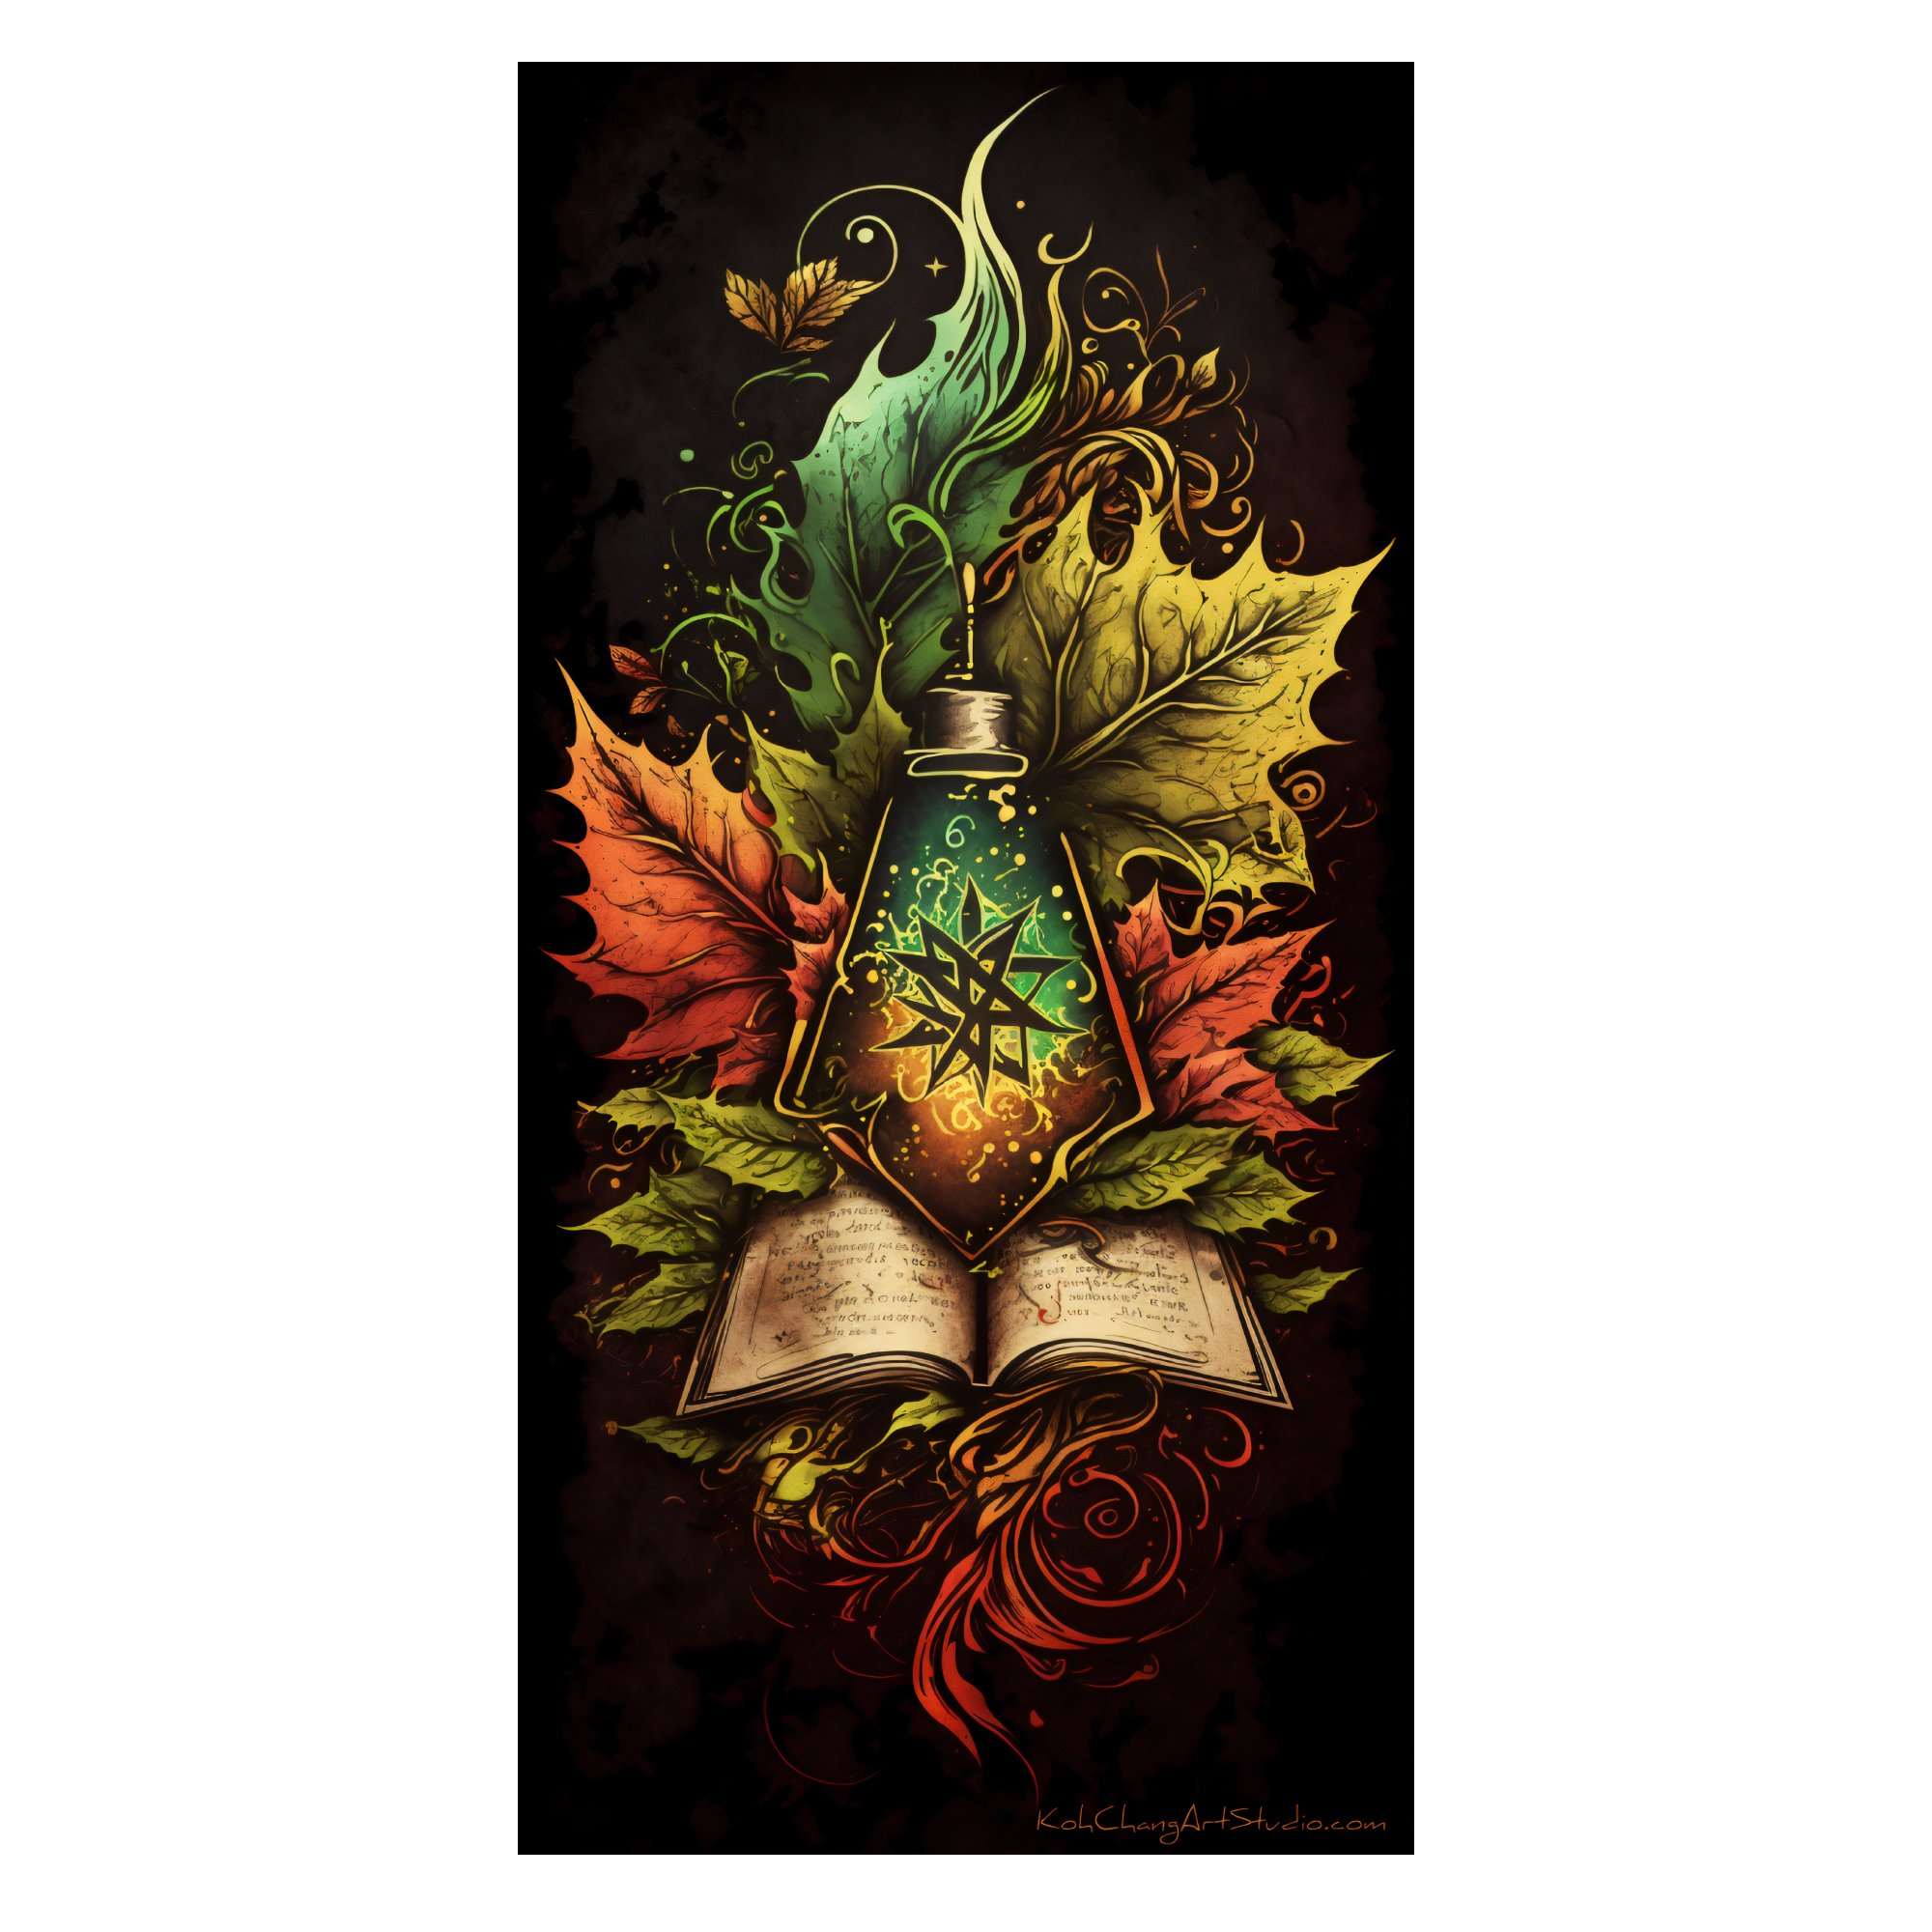 GRIMOIRE Artistic Image - A gleaming vessel wrapped in whispers, with leaves and petals suggesting an ancient elixir.